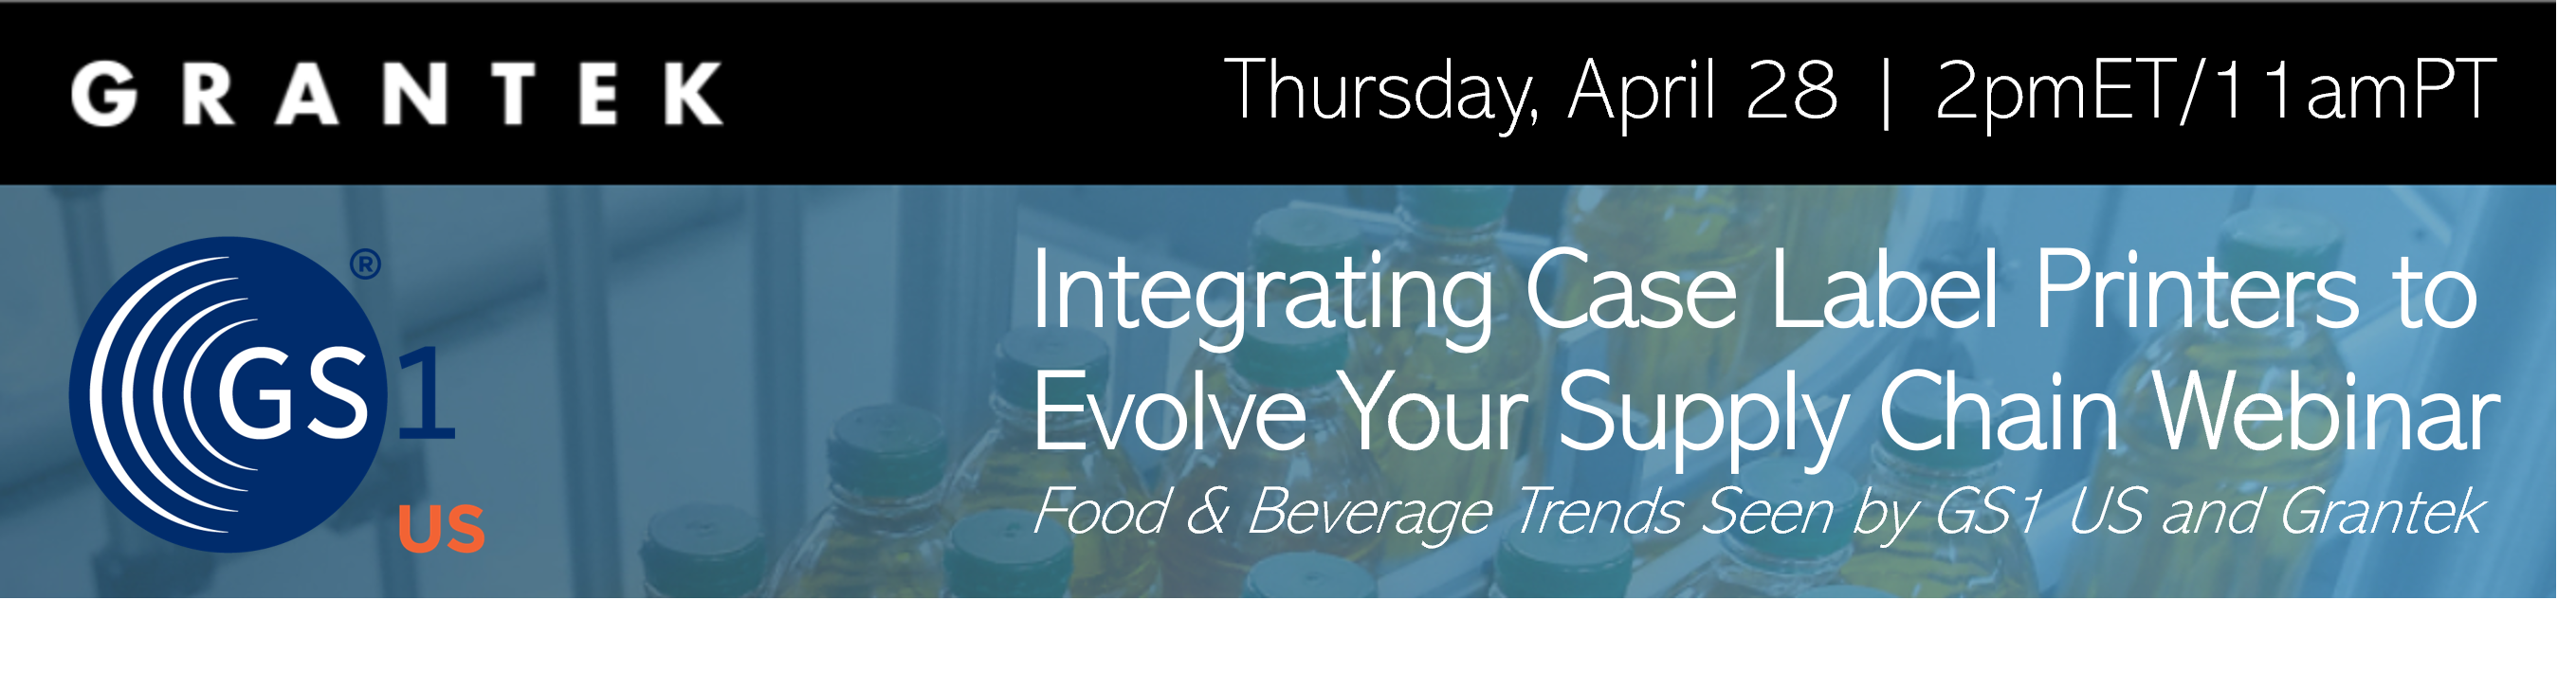 VIDEO – Integrating Case Label Printers to Evolve Your Supply Chain: Food & Beverage Trends Seen by GS1 US and Grantek